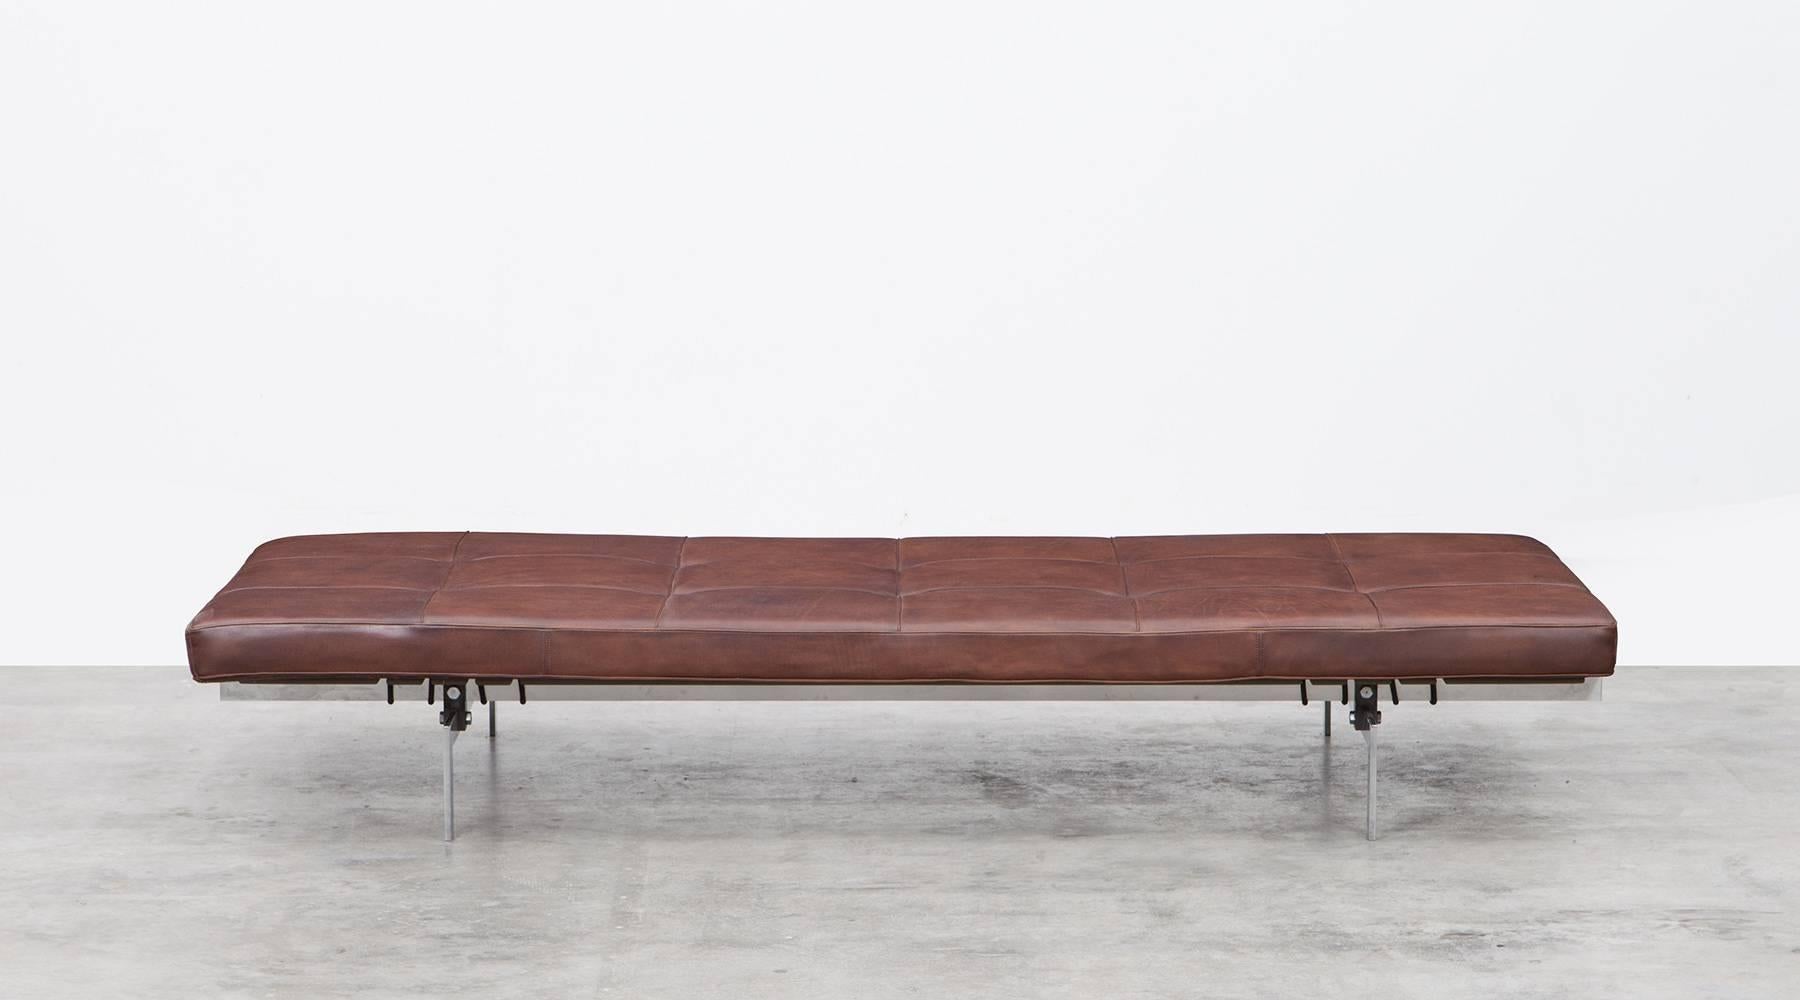 Classic daybed designed by Poul Kjaerholm. The dark brown thick leather tufted cushion fits perfectly on the chromium-plated steel frame. All-over it comes in perfect original condition. Manufactured by E. Kold Christensen.

Legendary Danish